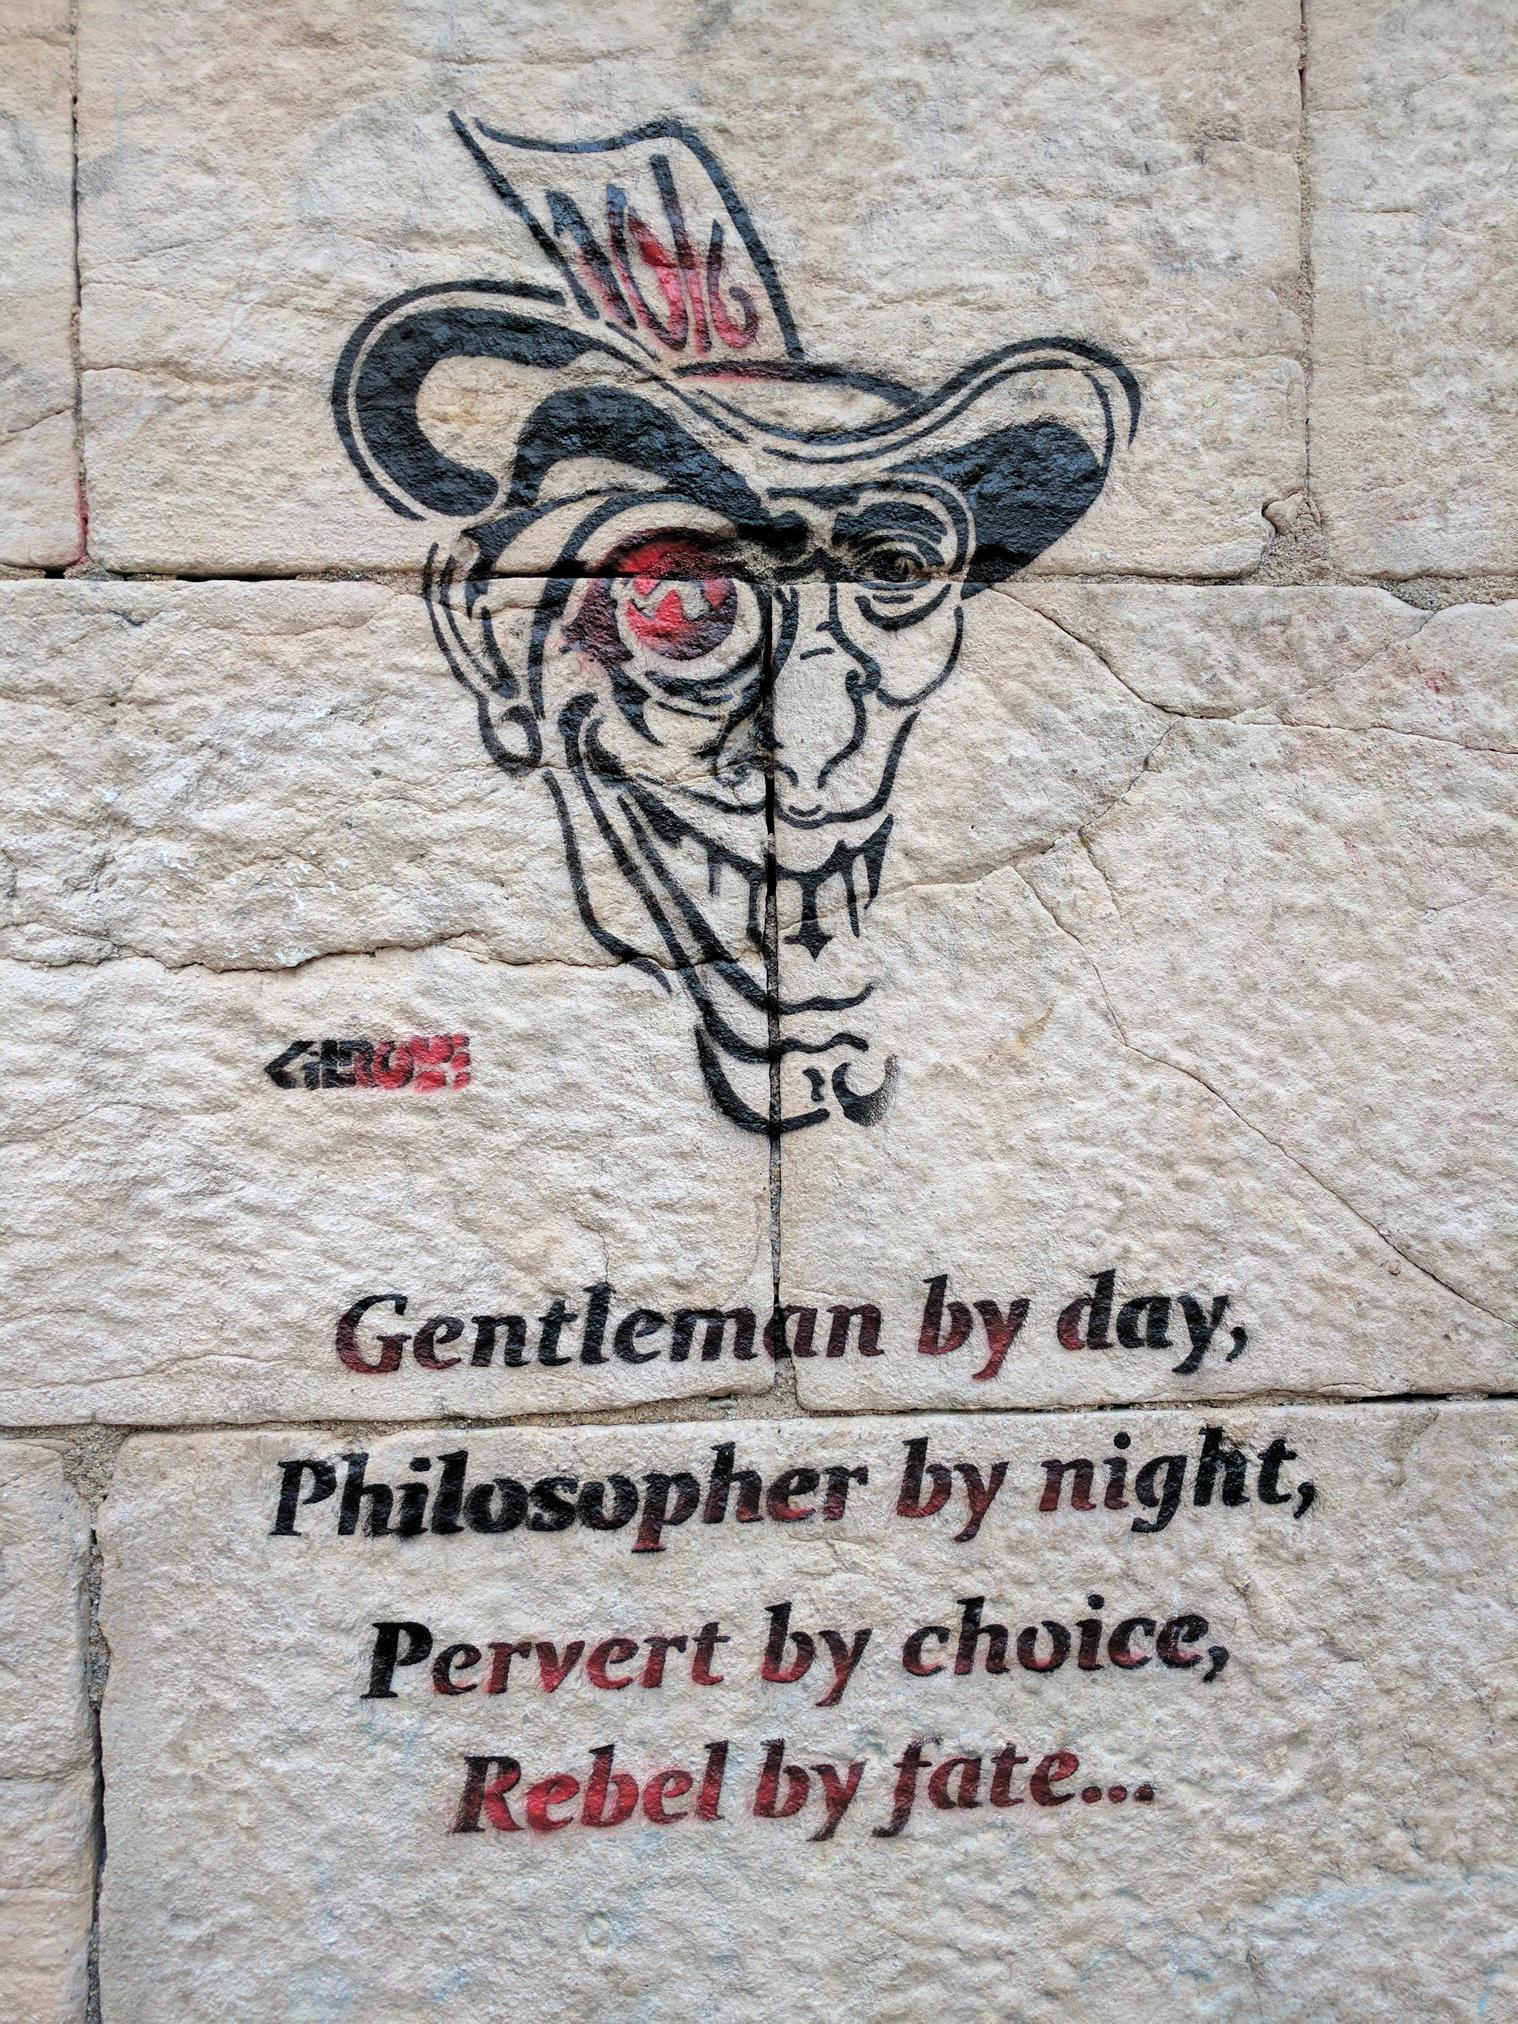 street art - Gentleman by day, Philosopher by night, Pervert by choice, Rebel by fate...